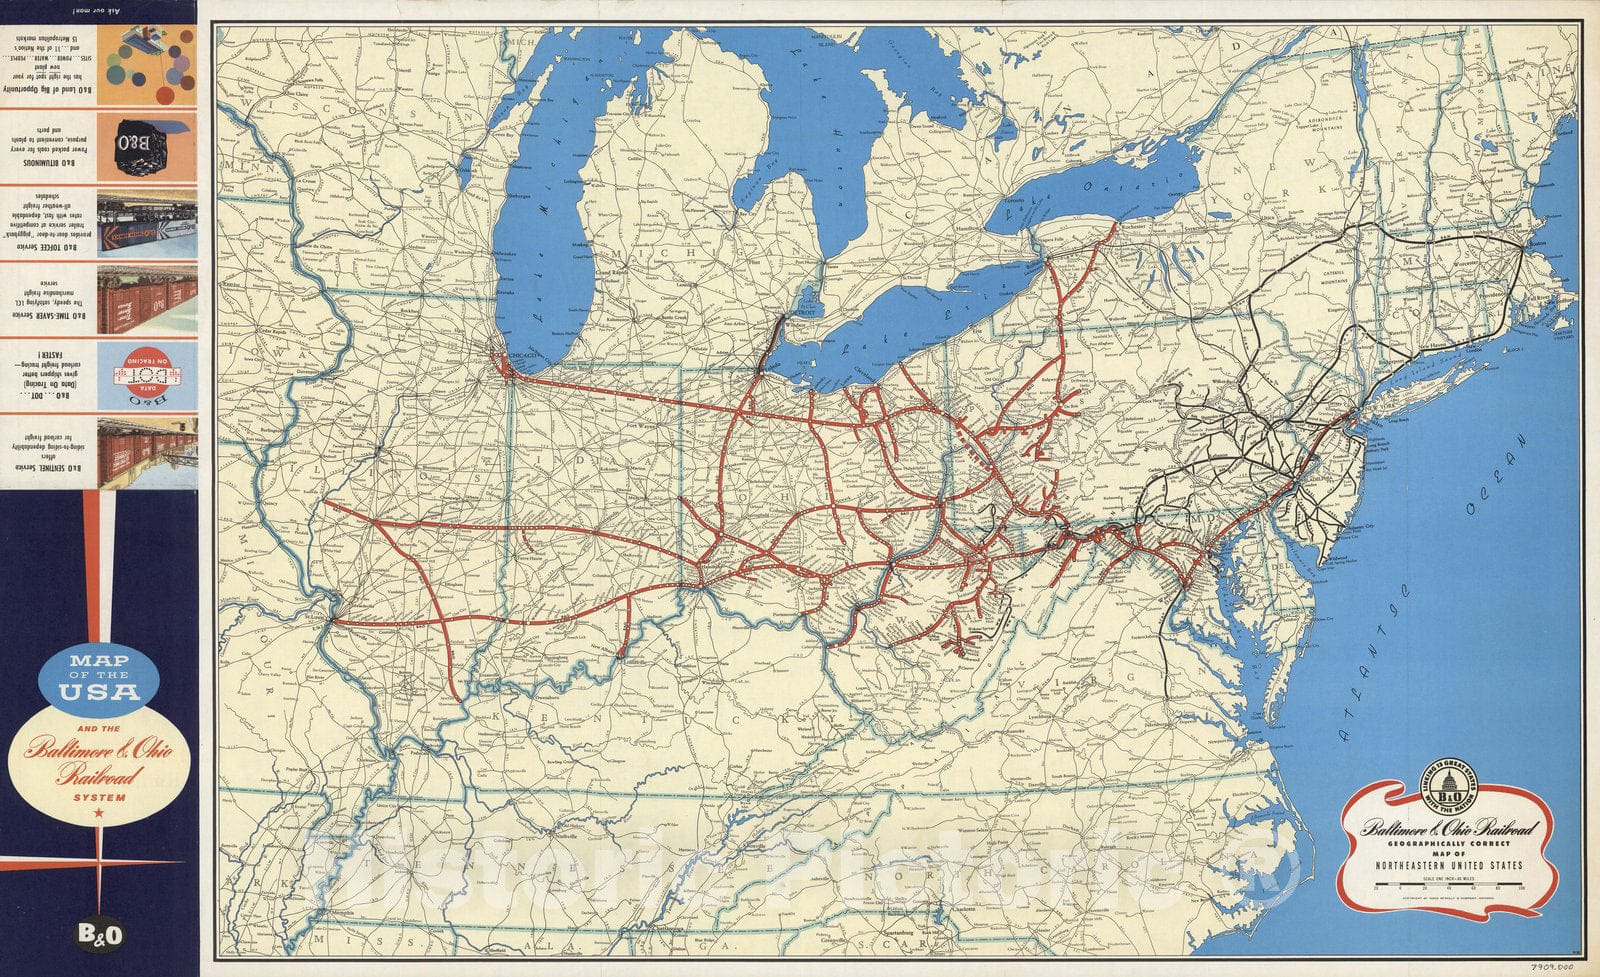 Historic Map : Baltimore & Ohio Railroad Geographically Correct Map of Northeastern United States, 1958 - Vintage Wall Art